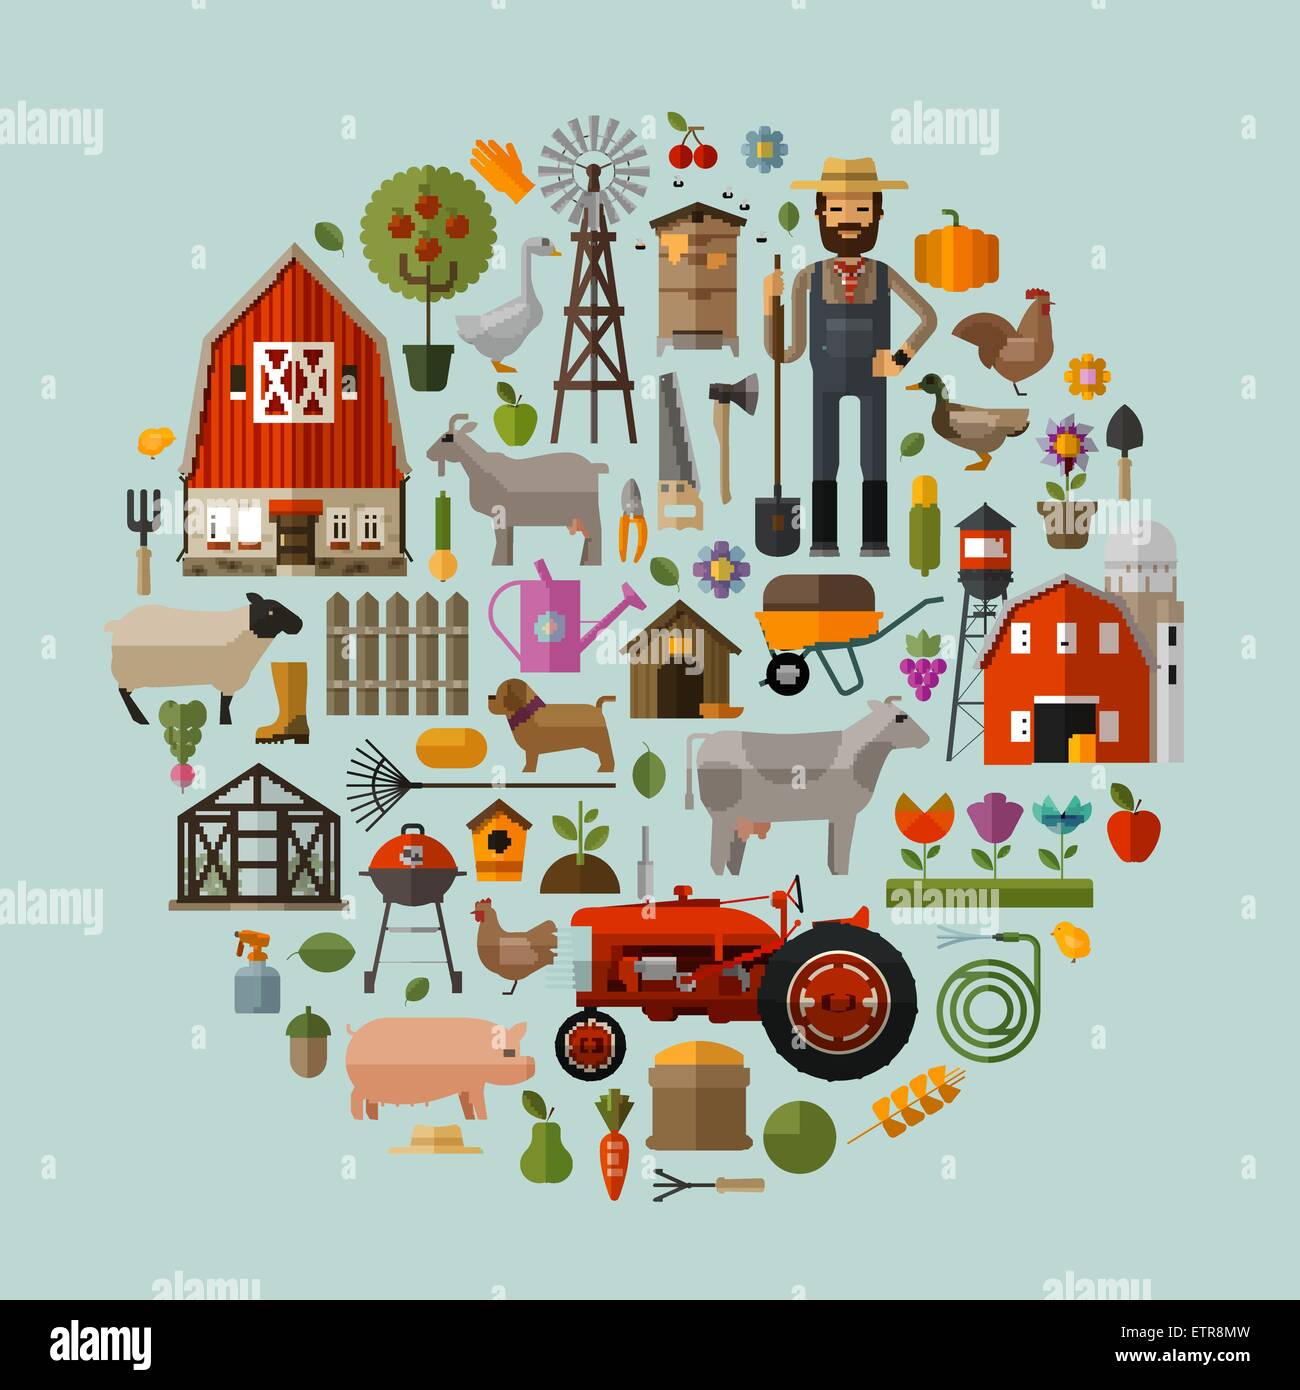 farm in the village. A set of elements - house, barn, animals, tractor, flowers, fruits and vegetables Stock Vector